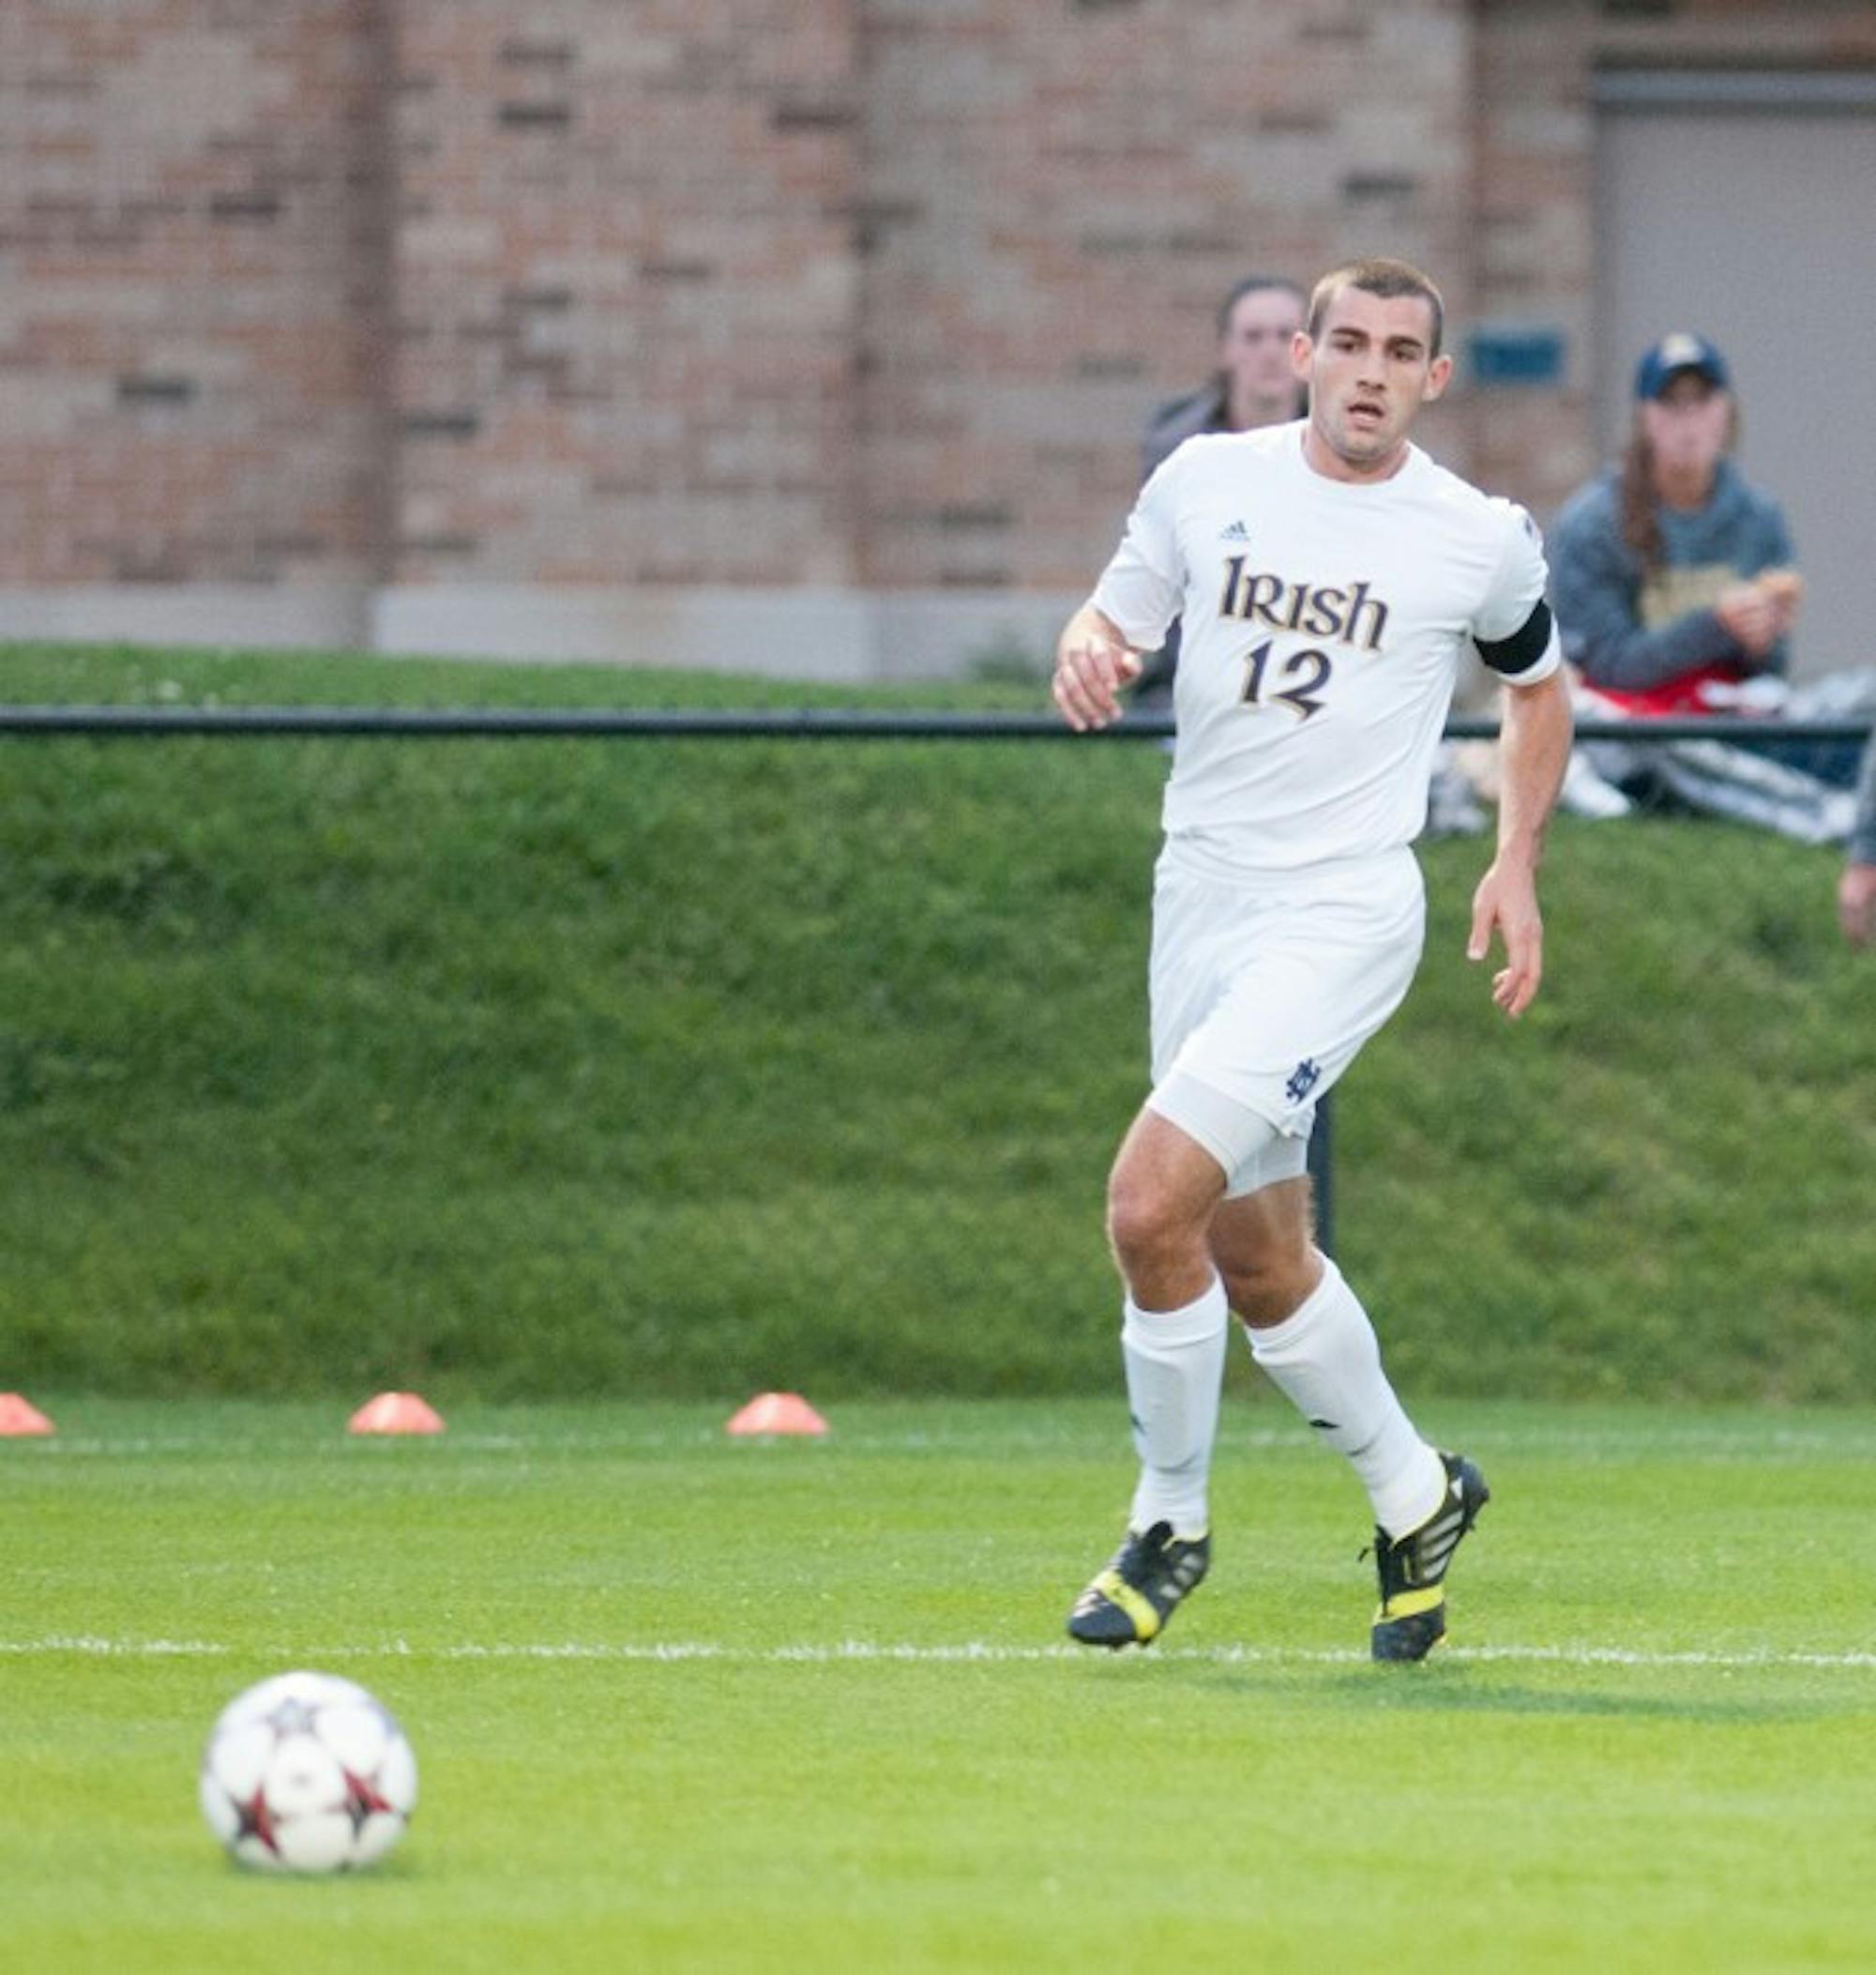 Irish graduate student defender Andrew O’Malley chases the ball during Notre Dame’s 3-0 victory over Michigan on Sept. 17 at Alumni Stadium.